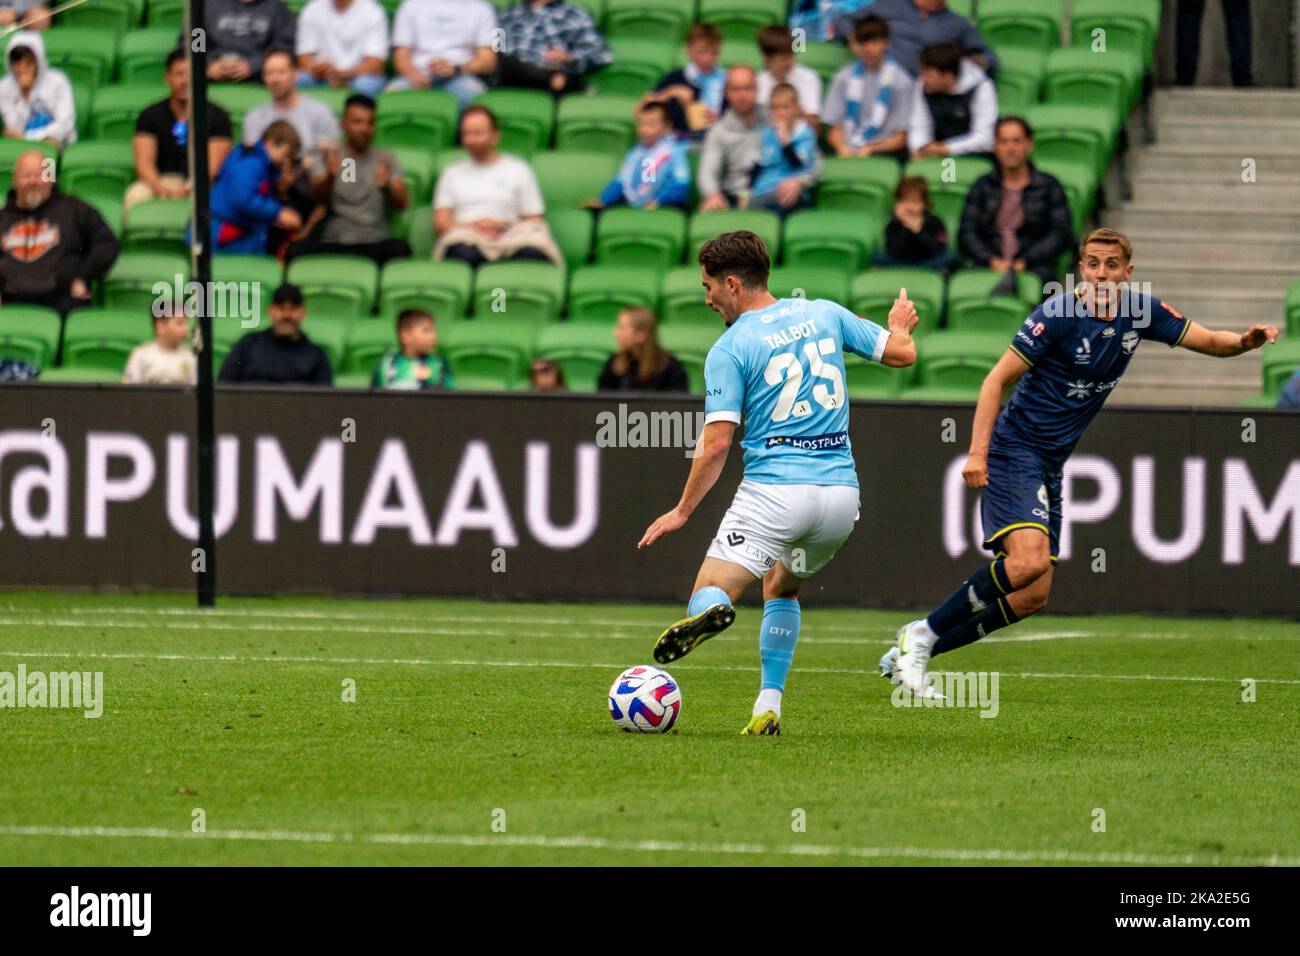 Melbourne, Australia. 30,October, 2022. Melbourne City’s Callum Talbot #25 plays a through-ball to Jamie Maclaren #9 during Round 4 Melbourne City vs. Wellington Phoenix game at AAMI Park Credit: James Forrester/Alamy Live News. Stock Photo